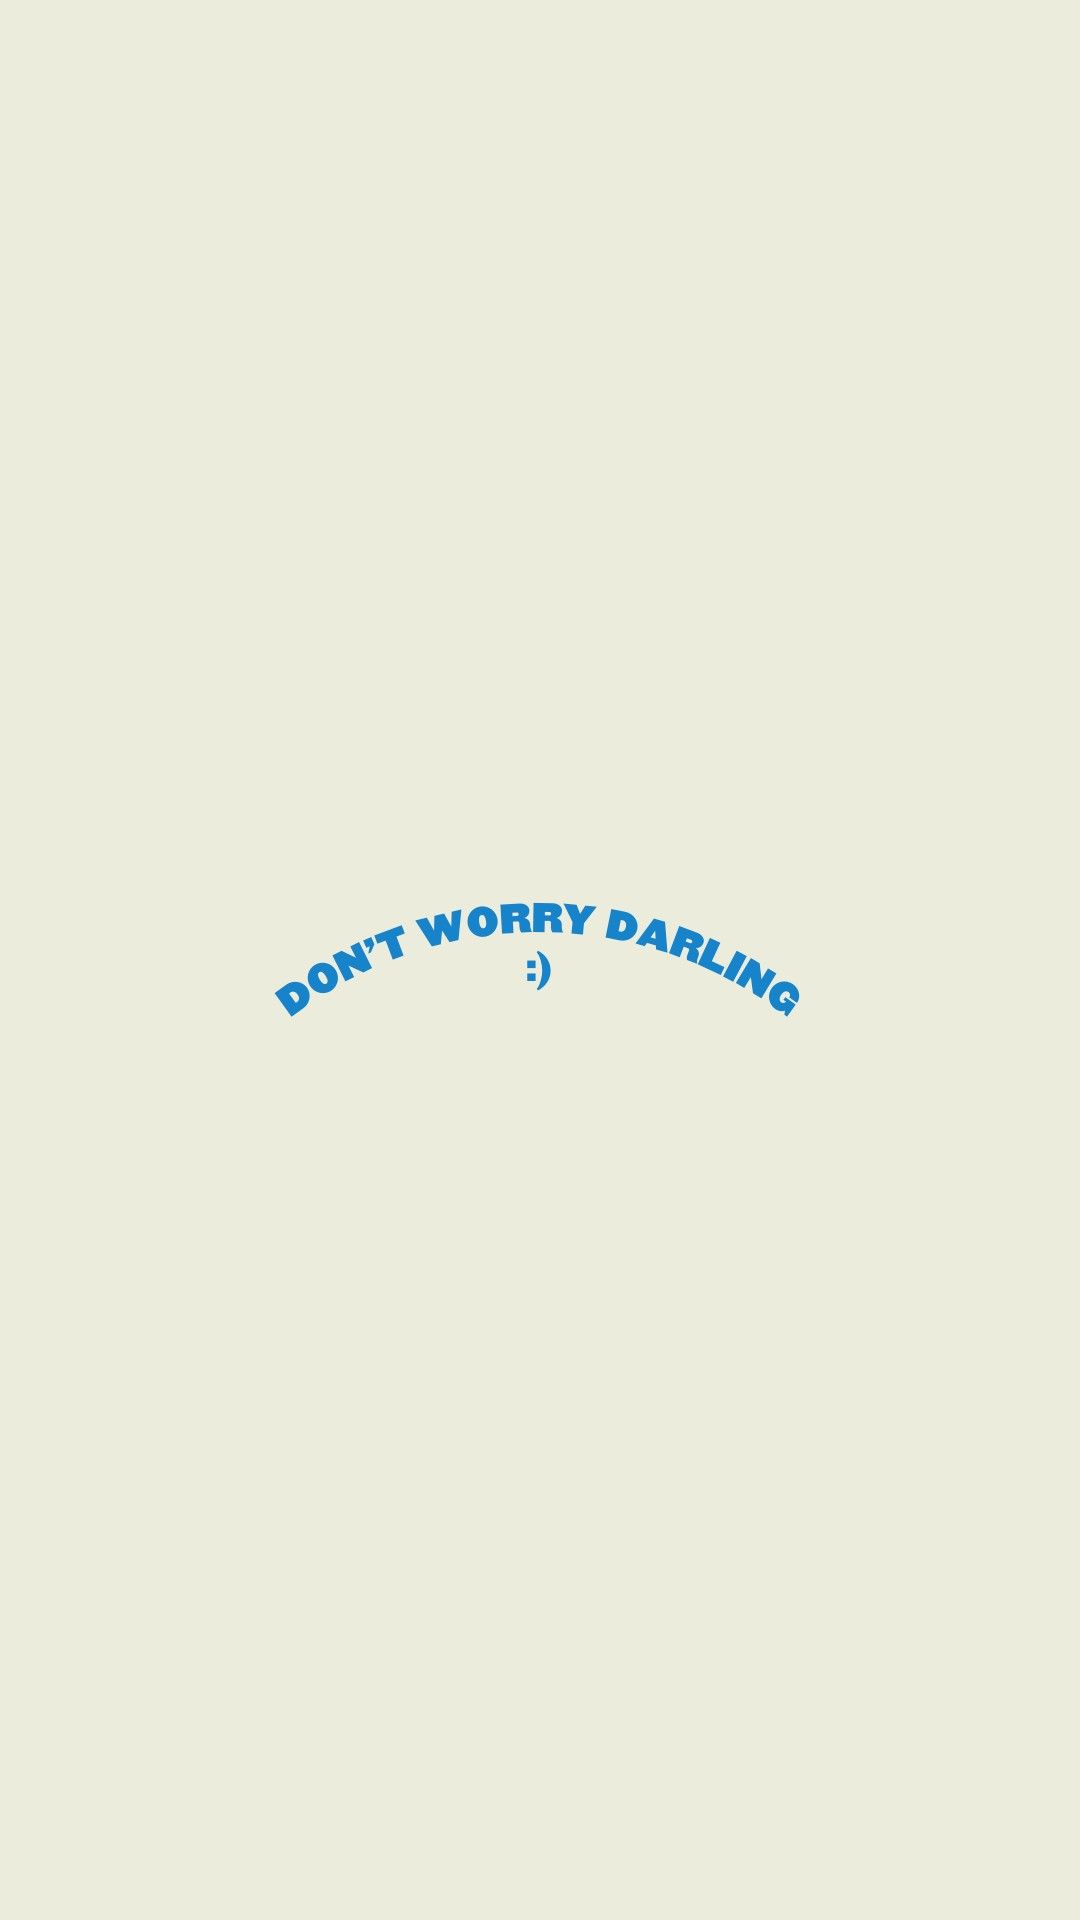 don't worry darling. Wallpaper quotes, Happy words, Quote aesthetic